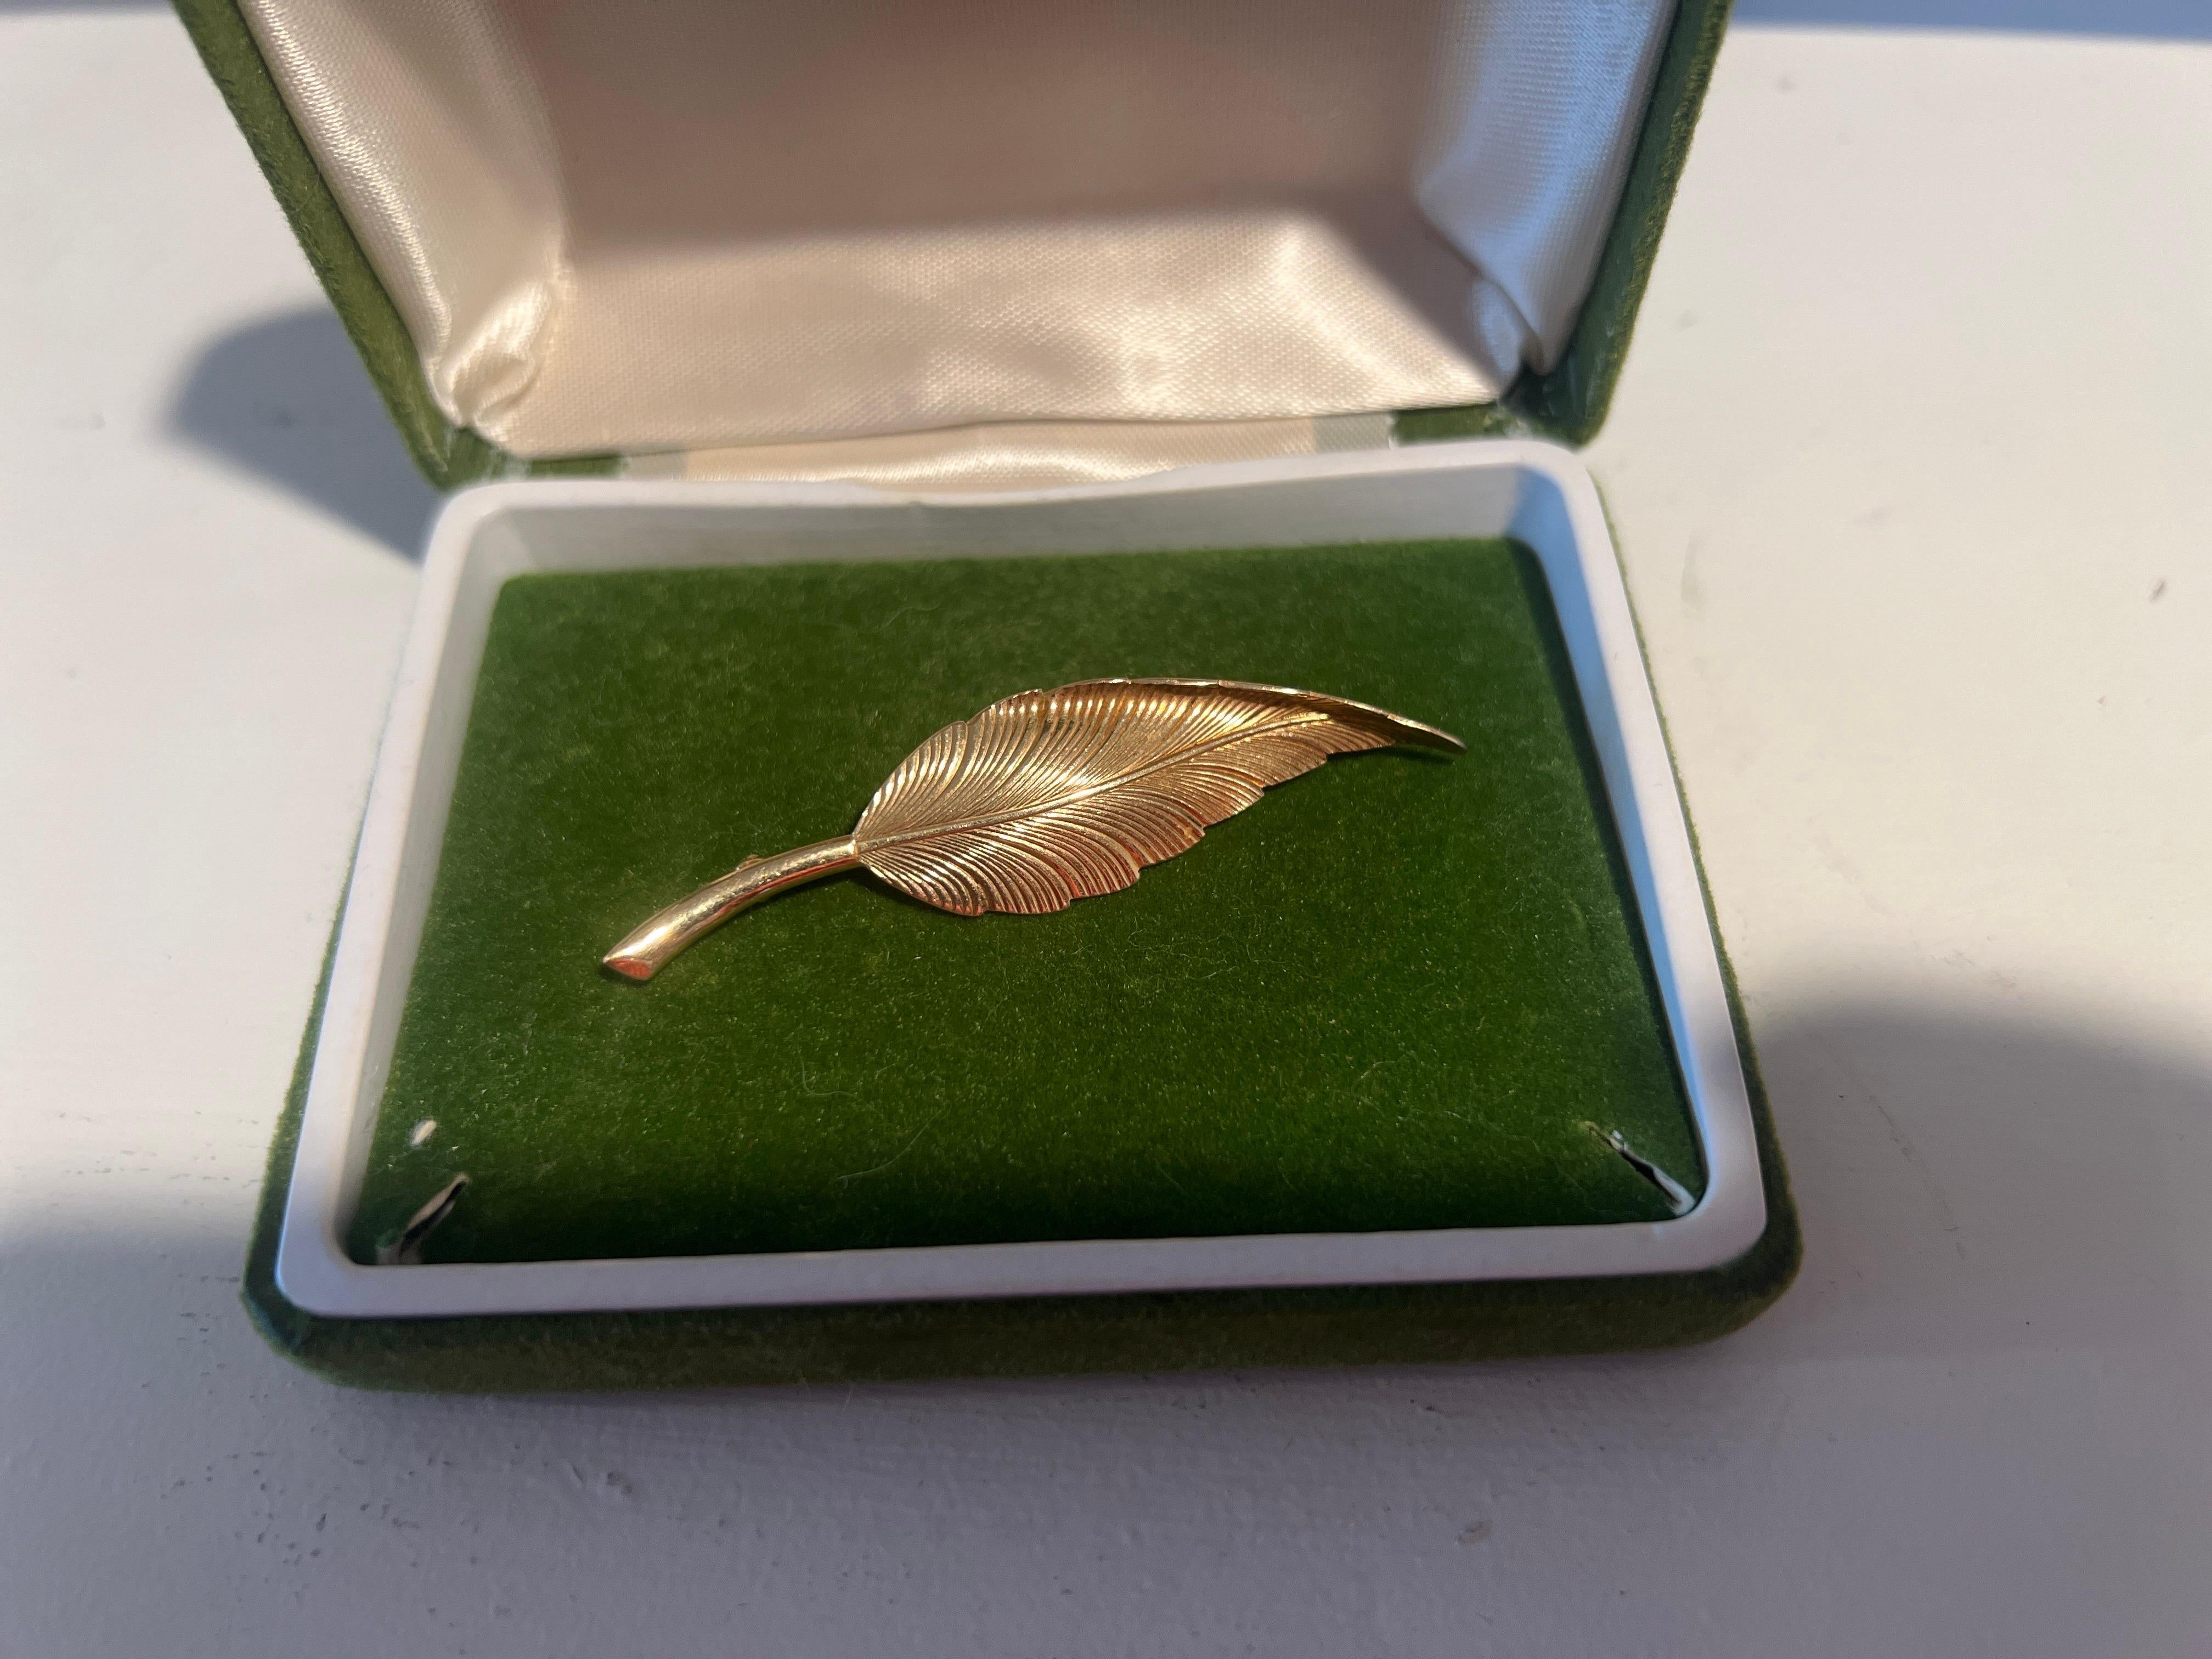 Tiffany & Company (American, founded 1837), 20th century.

A 14K yellow gold feathered leaf brooch. Marked to verso 